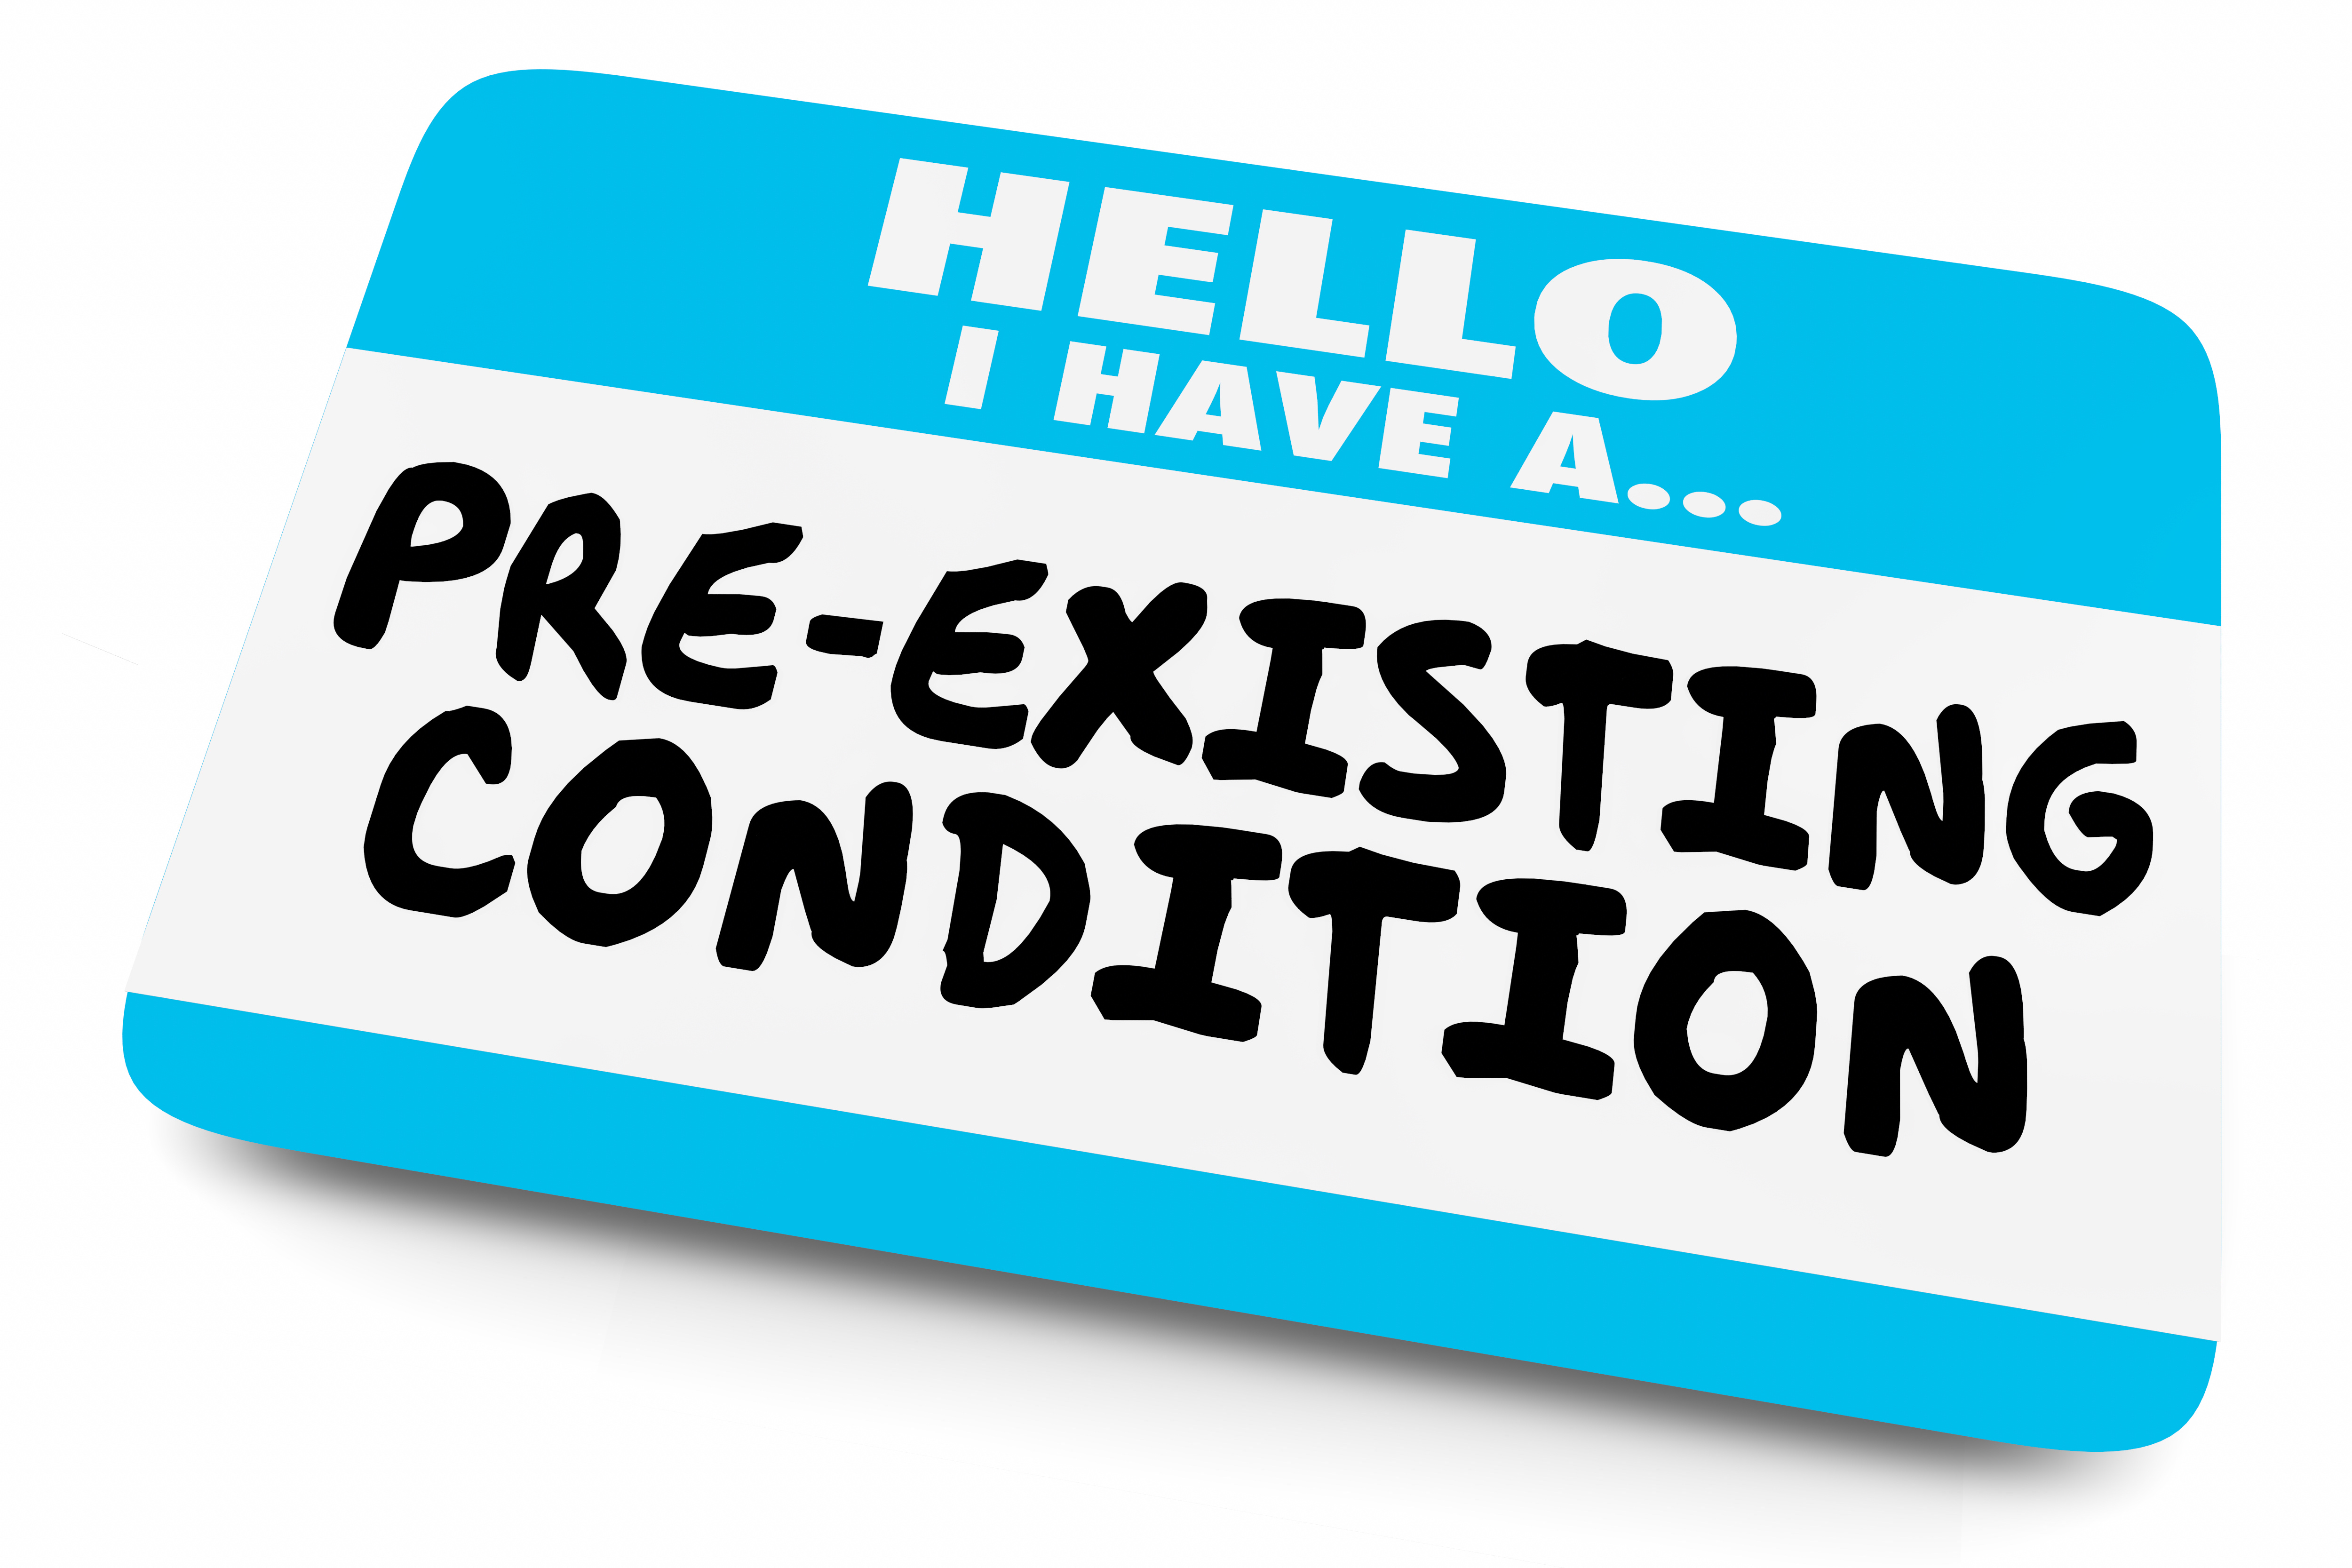 Name Tag: I Have a Pre-Existing Condition Name Tag 3d Illustration